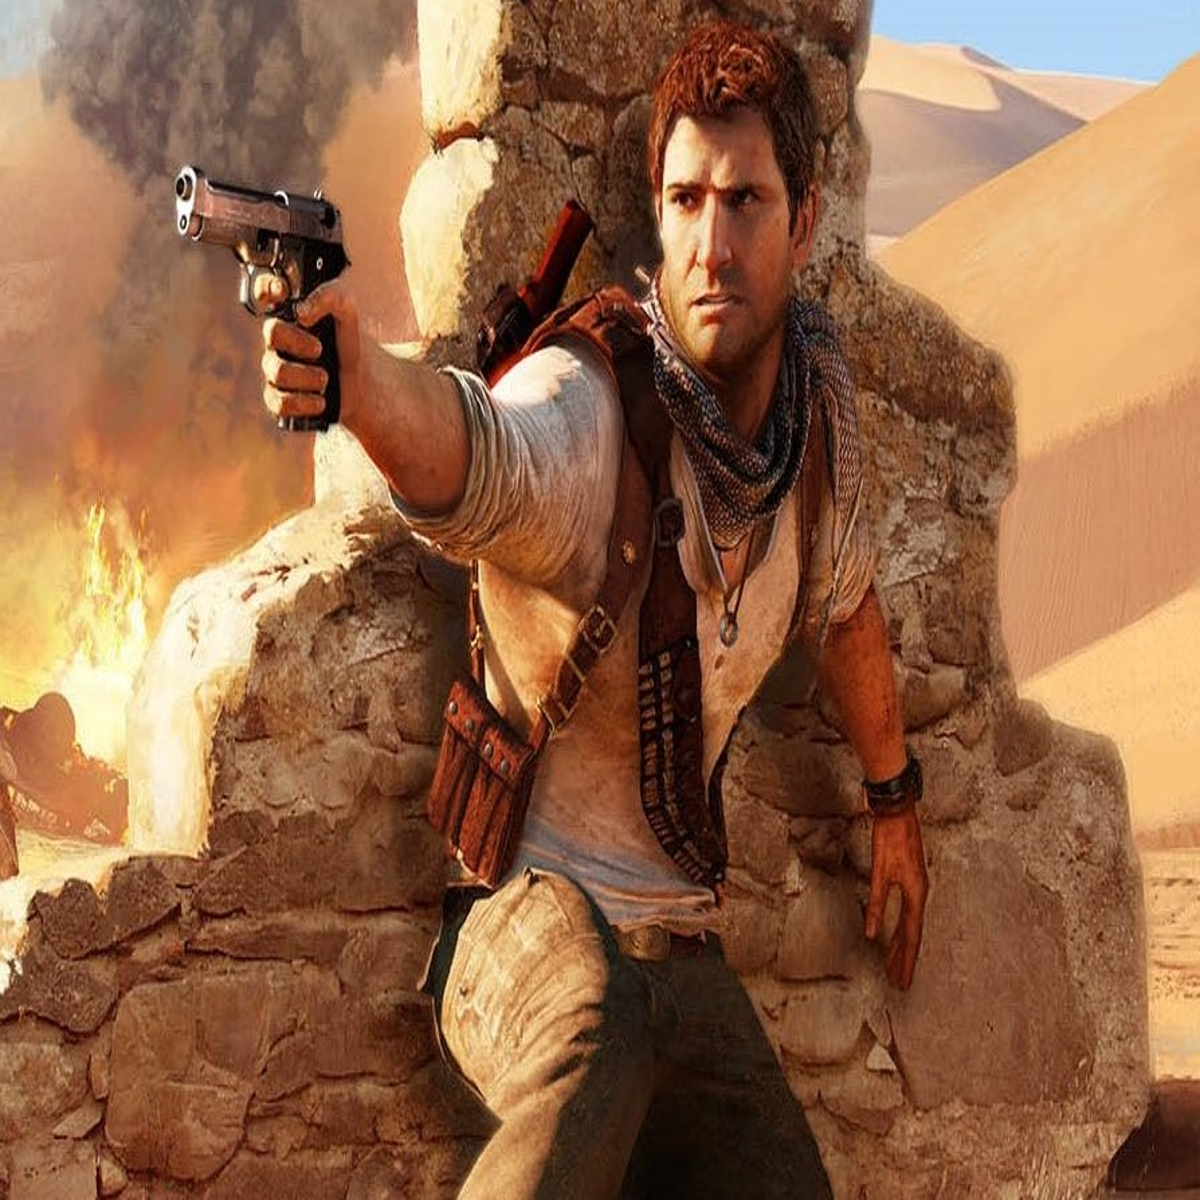 Confronto: Uncharted 3: Drake's Deception na PS4